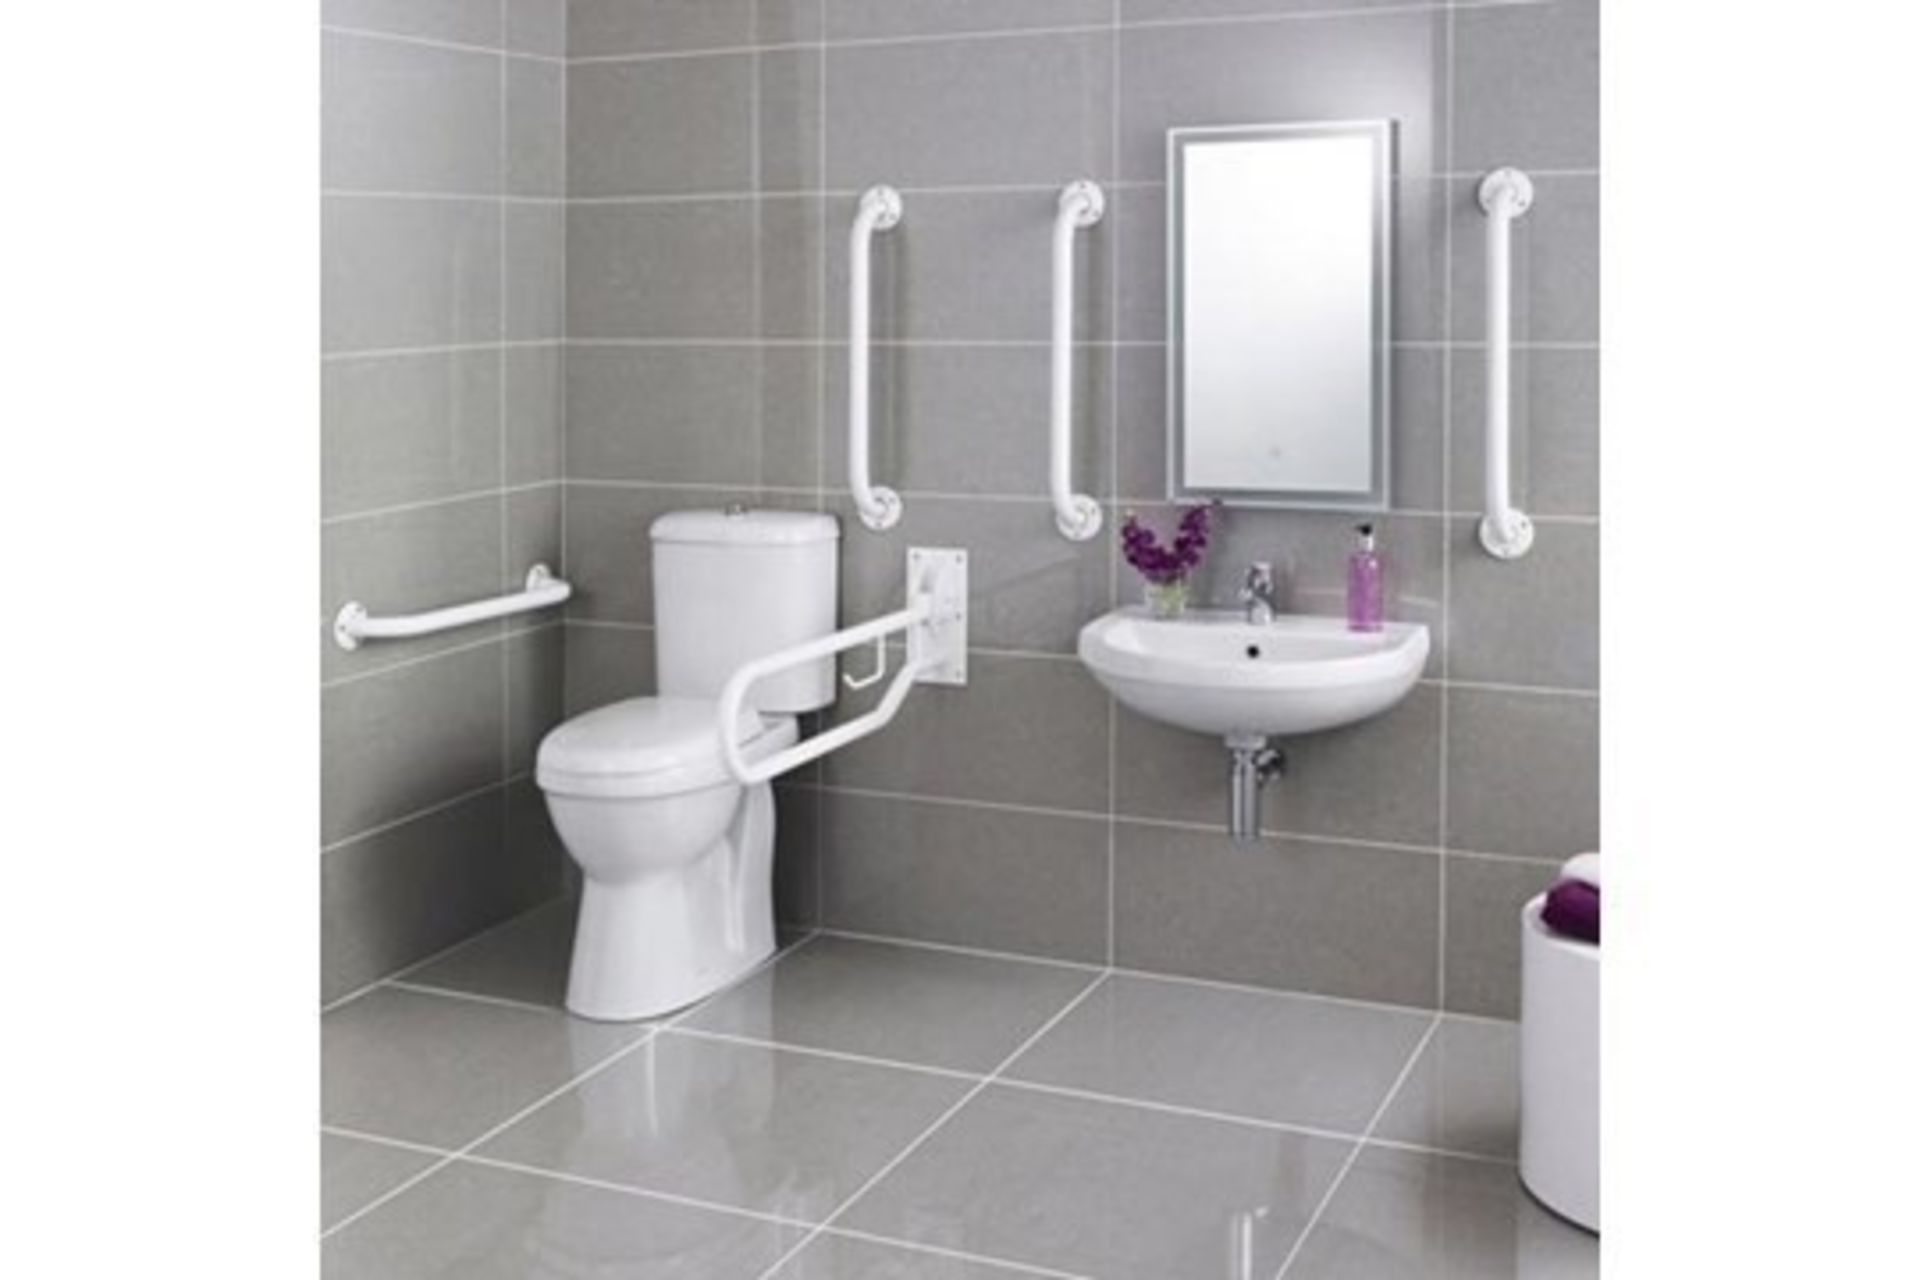 Roca Laura Access disabled toilet grab rail set in Grey, please note the picture is the white